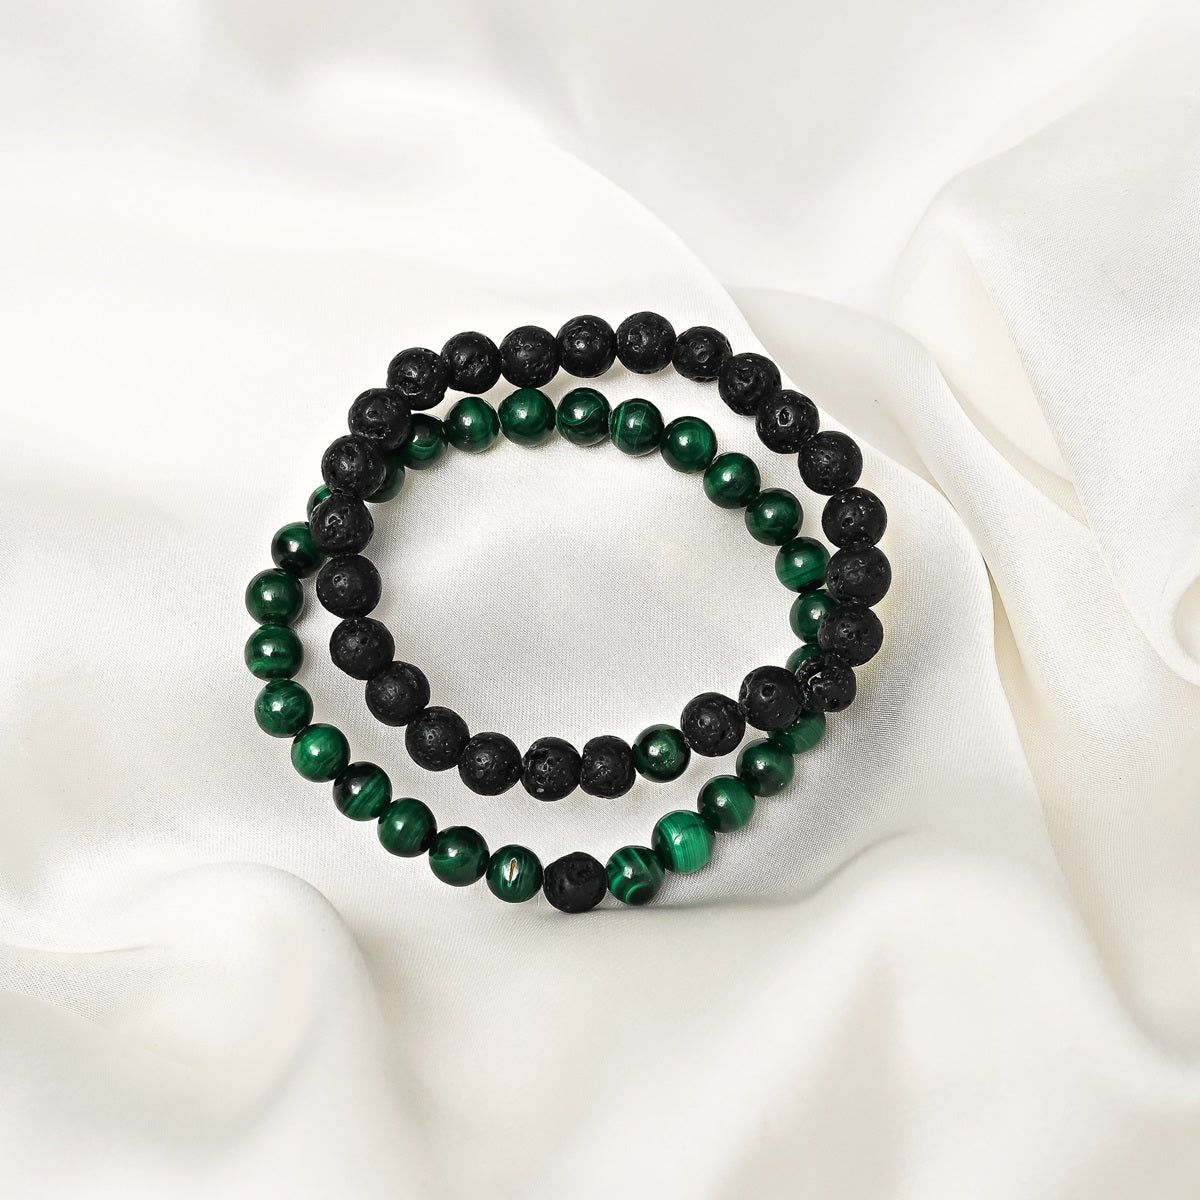 Detailed close-up showcasing the intricate beauty of green Malachite and black Lava gemstones in our exquisite bracelet.